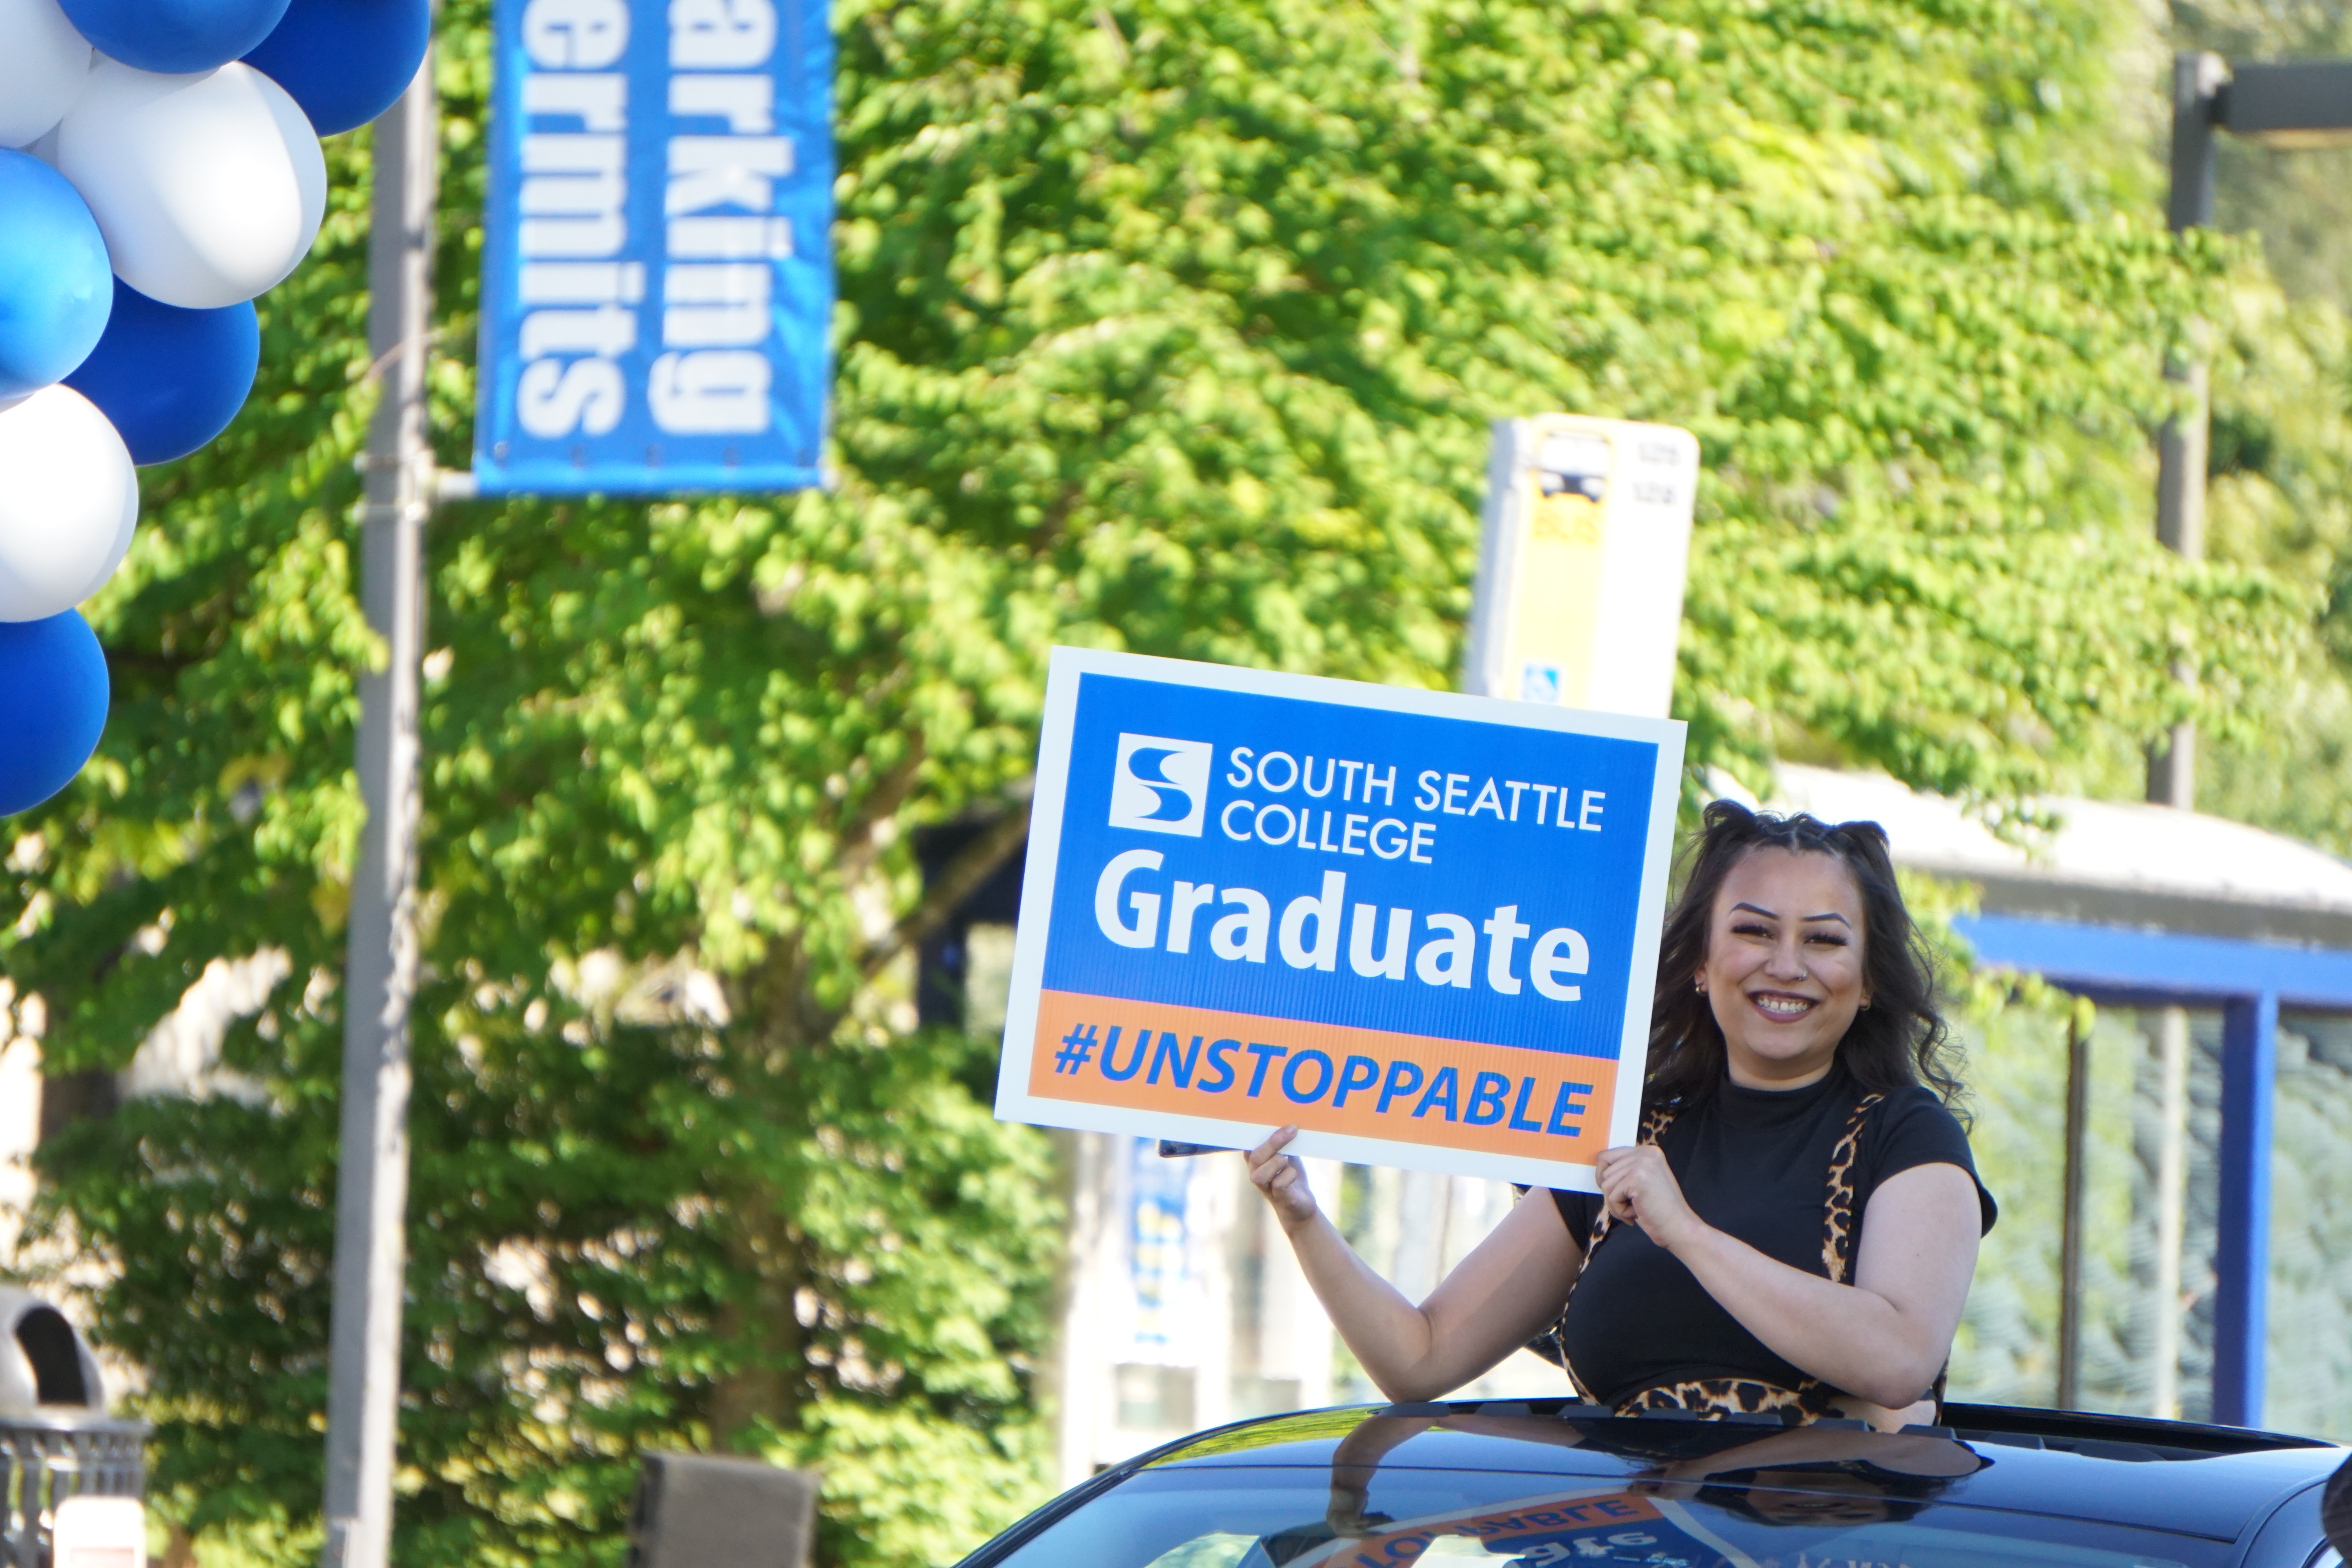 South Seattle College Celebrates the Unstoppable Class of 2020